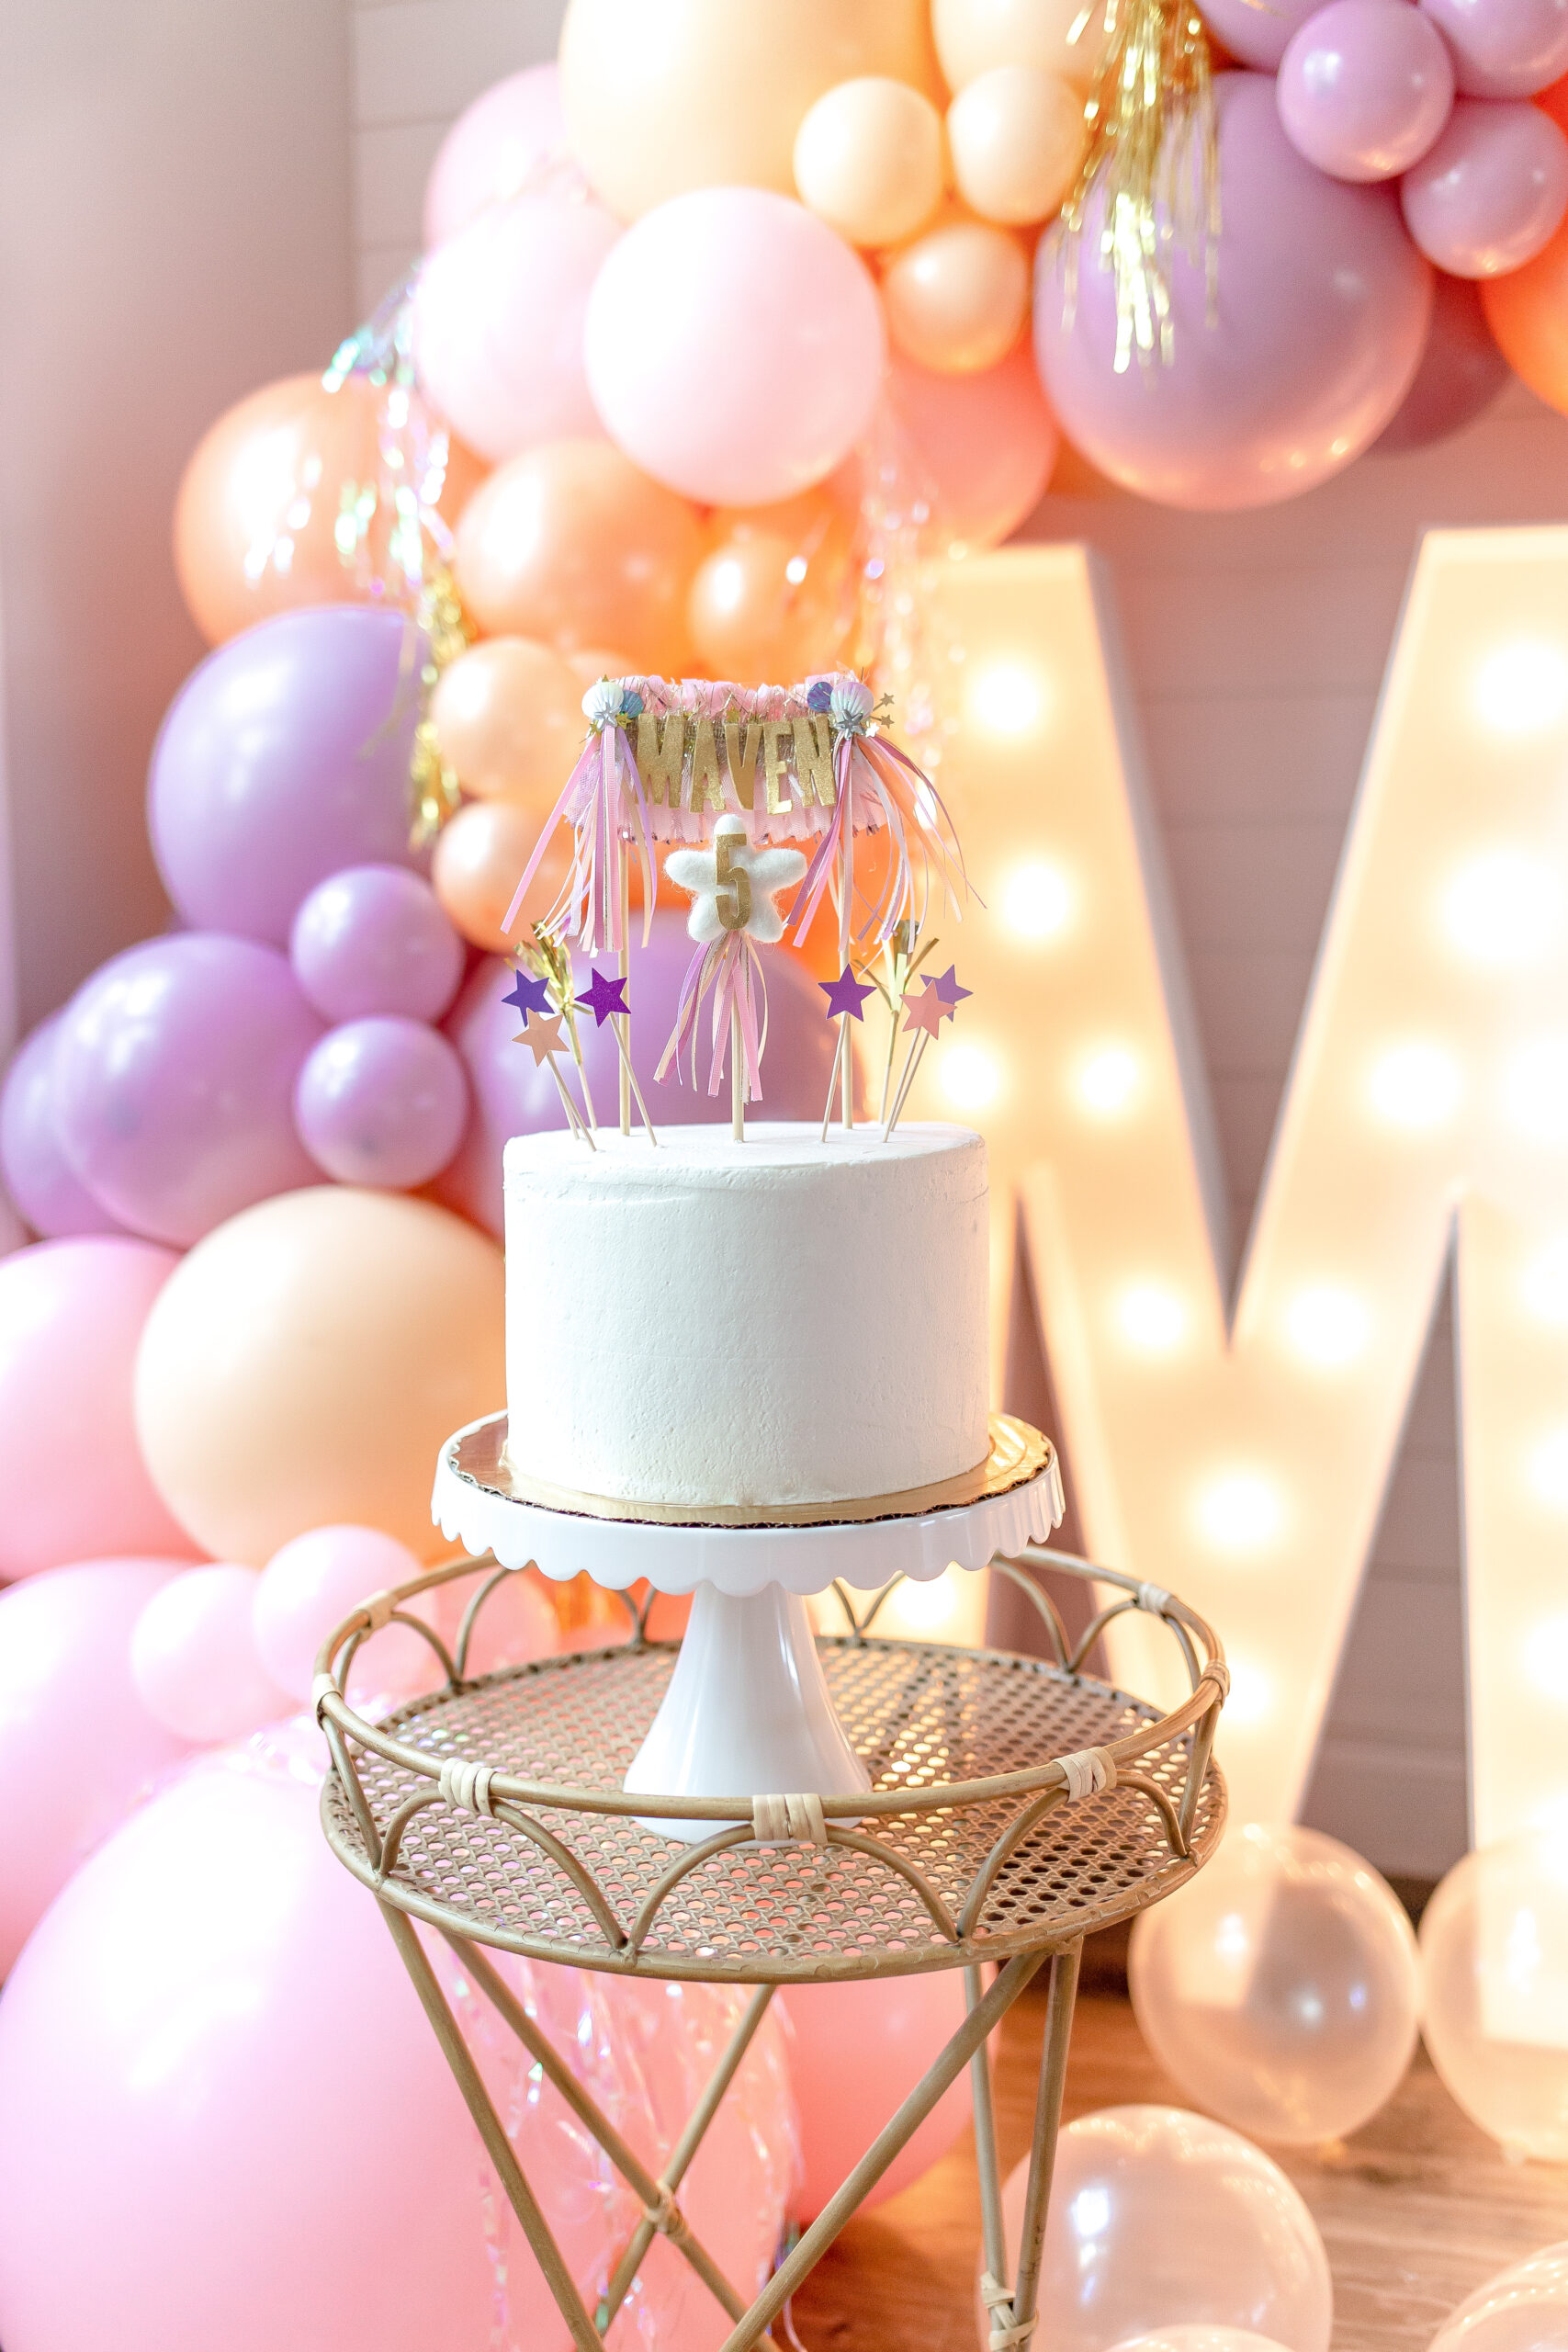 Maven cake topper with purple and pink fringe for 5th birthday party